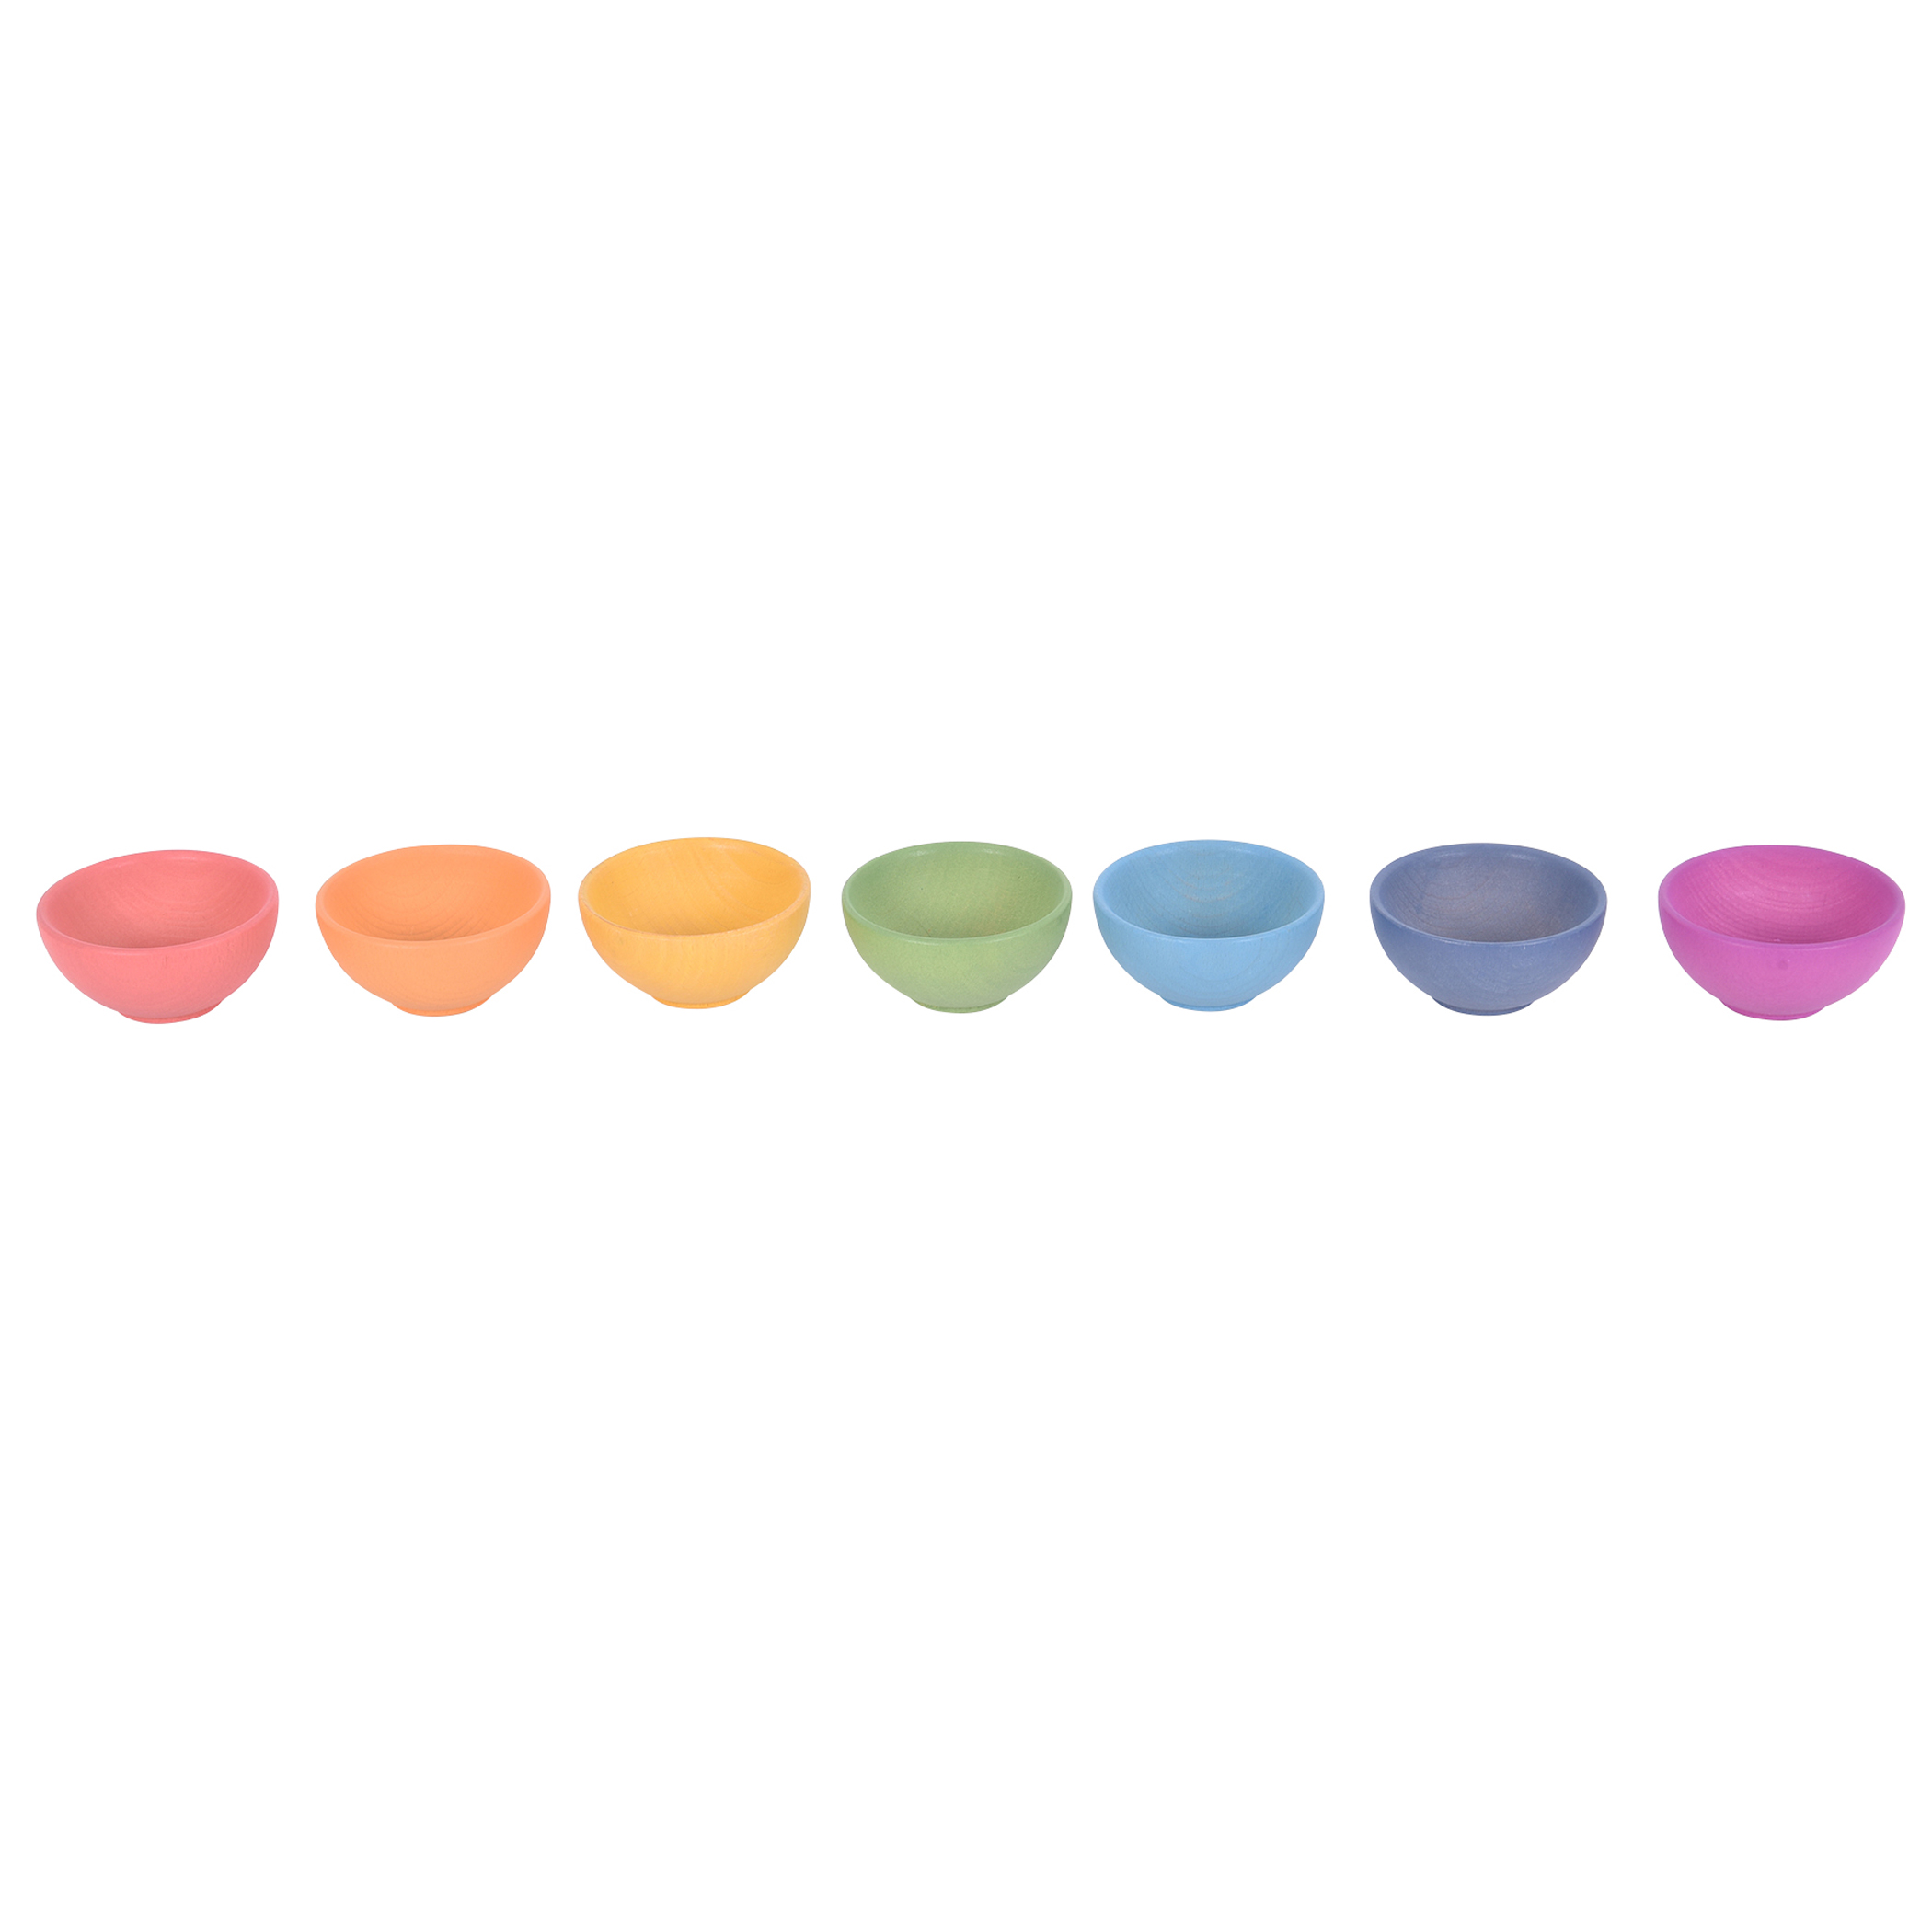 TickiT Rainbow Wooden Bowls - Set of 7 Colors - For Ages 10m+ - Loose Parts Wooden Toy for Babies and Toddlers